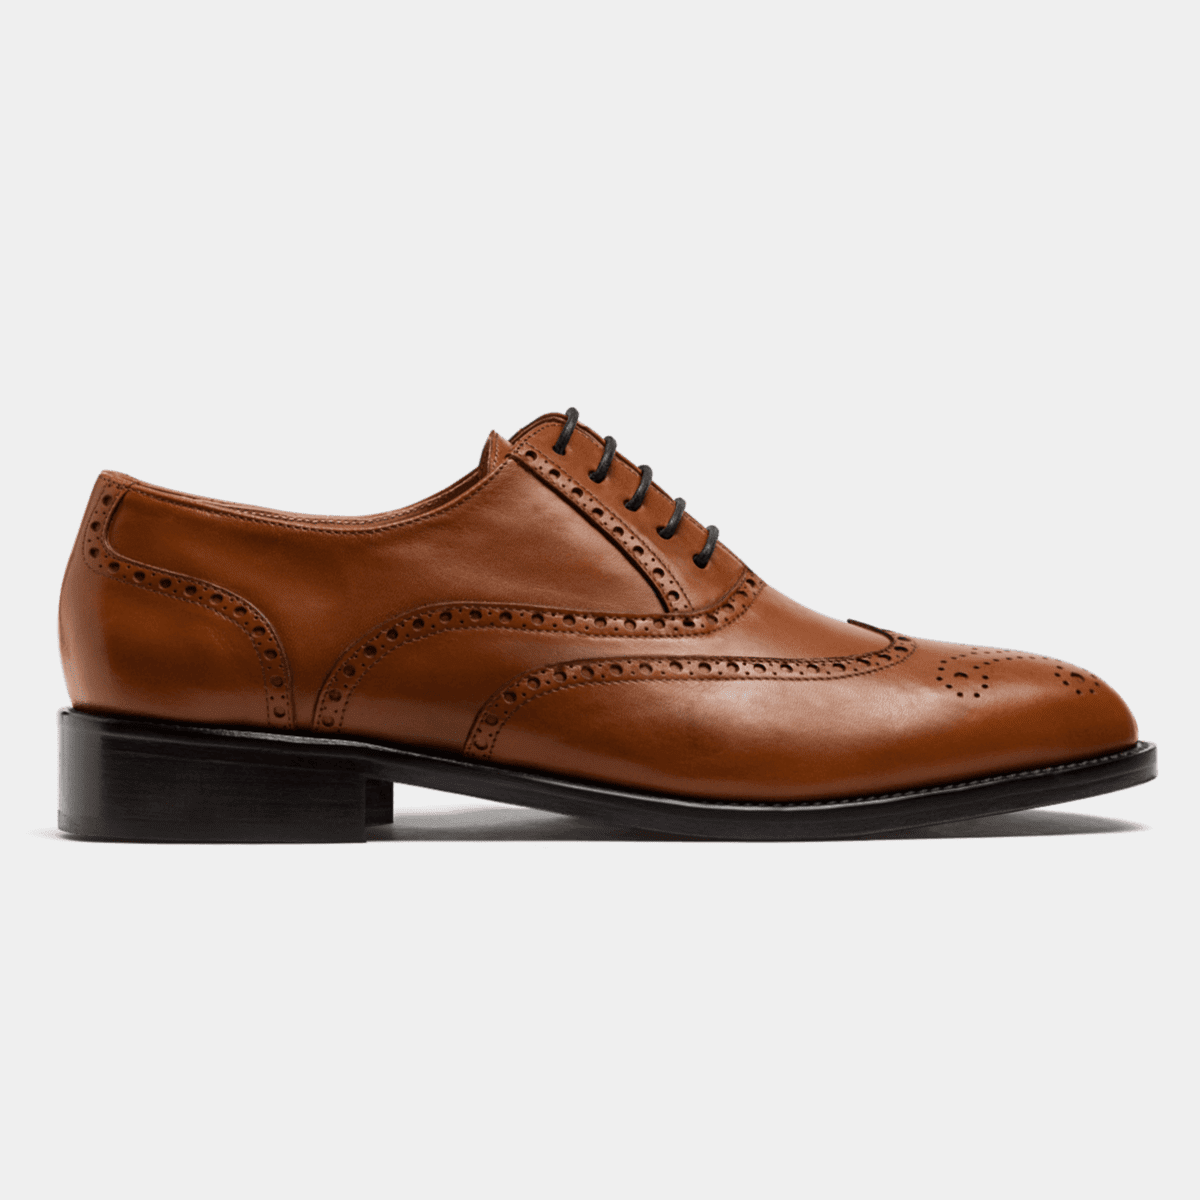 Handmade Beige Brown Leather Brogues for Men by TLypskyi Everyday Designer Shoes Made to Order Male Laced-up Oxfords Flat Tooled Shoes